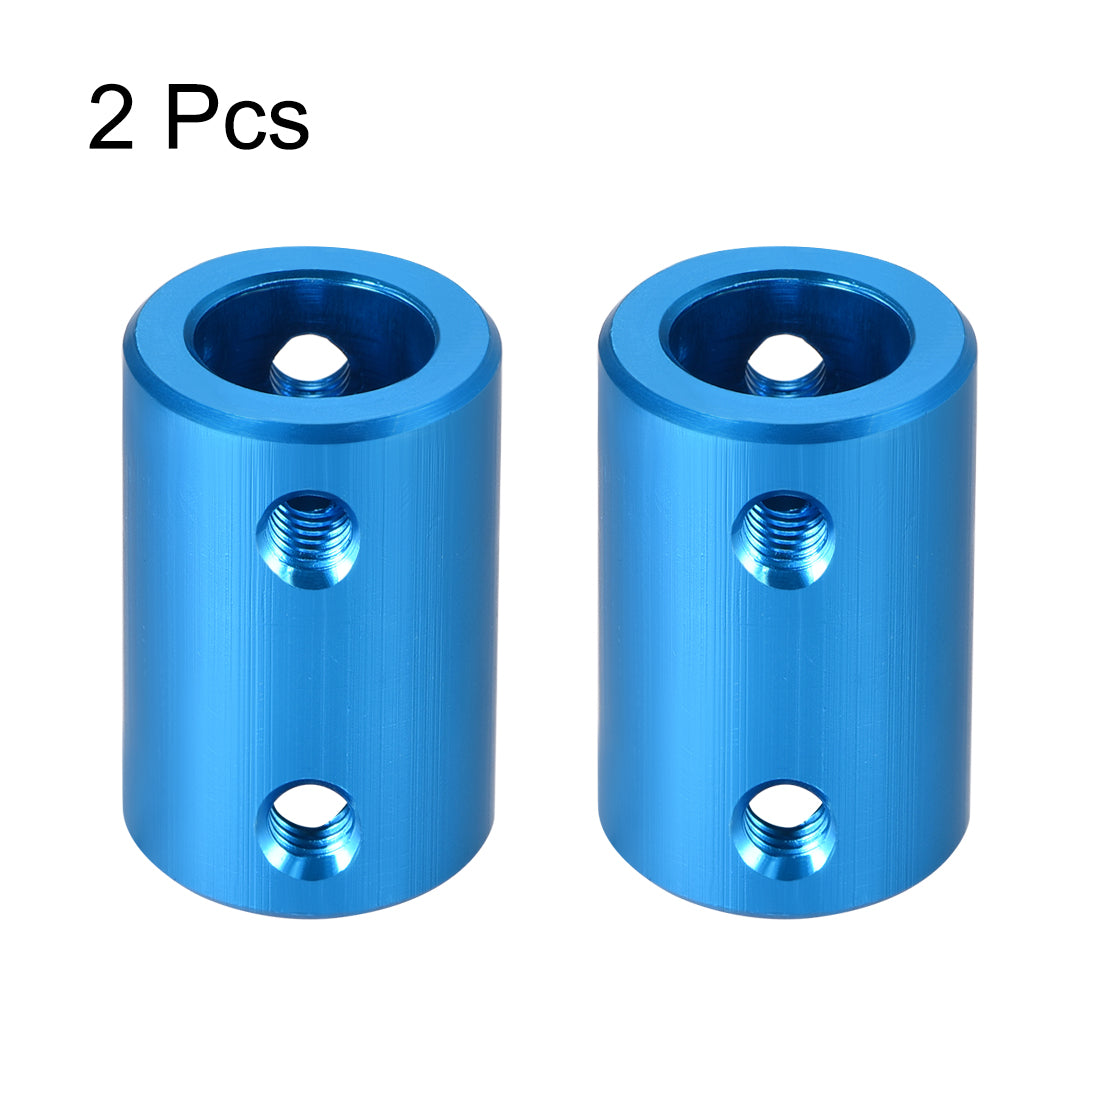 uxcell Uxcell Shaft Coupling 10mm to 10mm Bore L25xD16 Robot Motor Wheel Rigid Coupler Connector Blue 2 Pcs